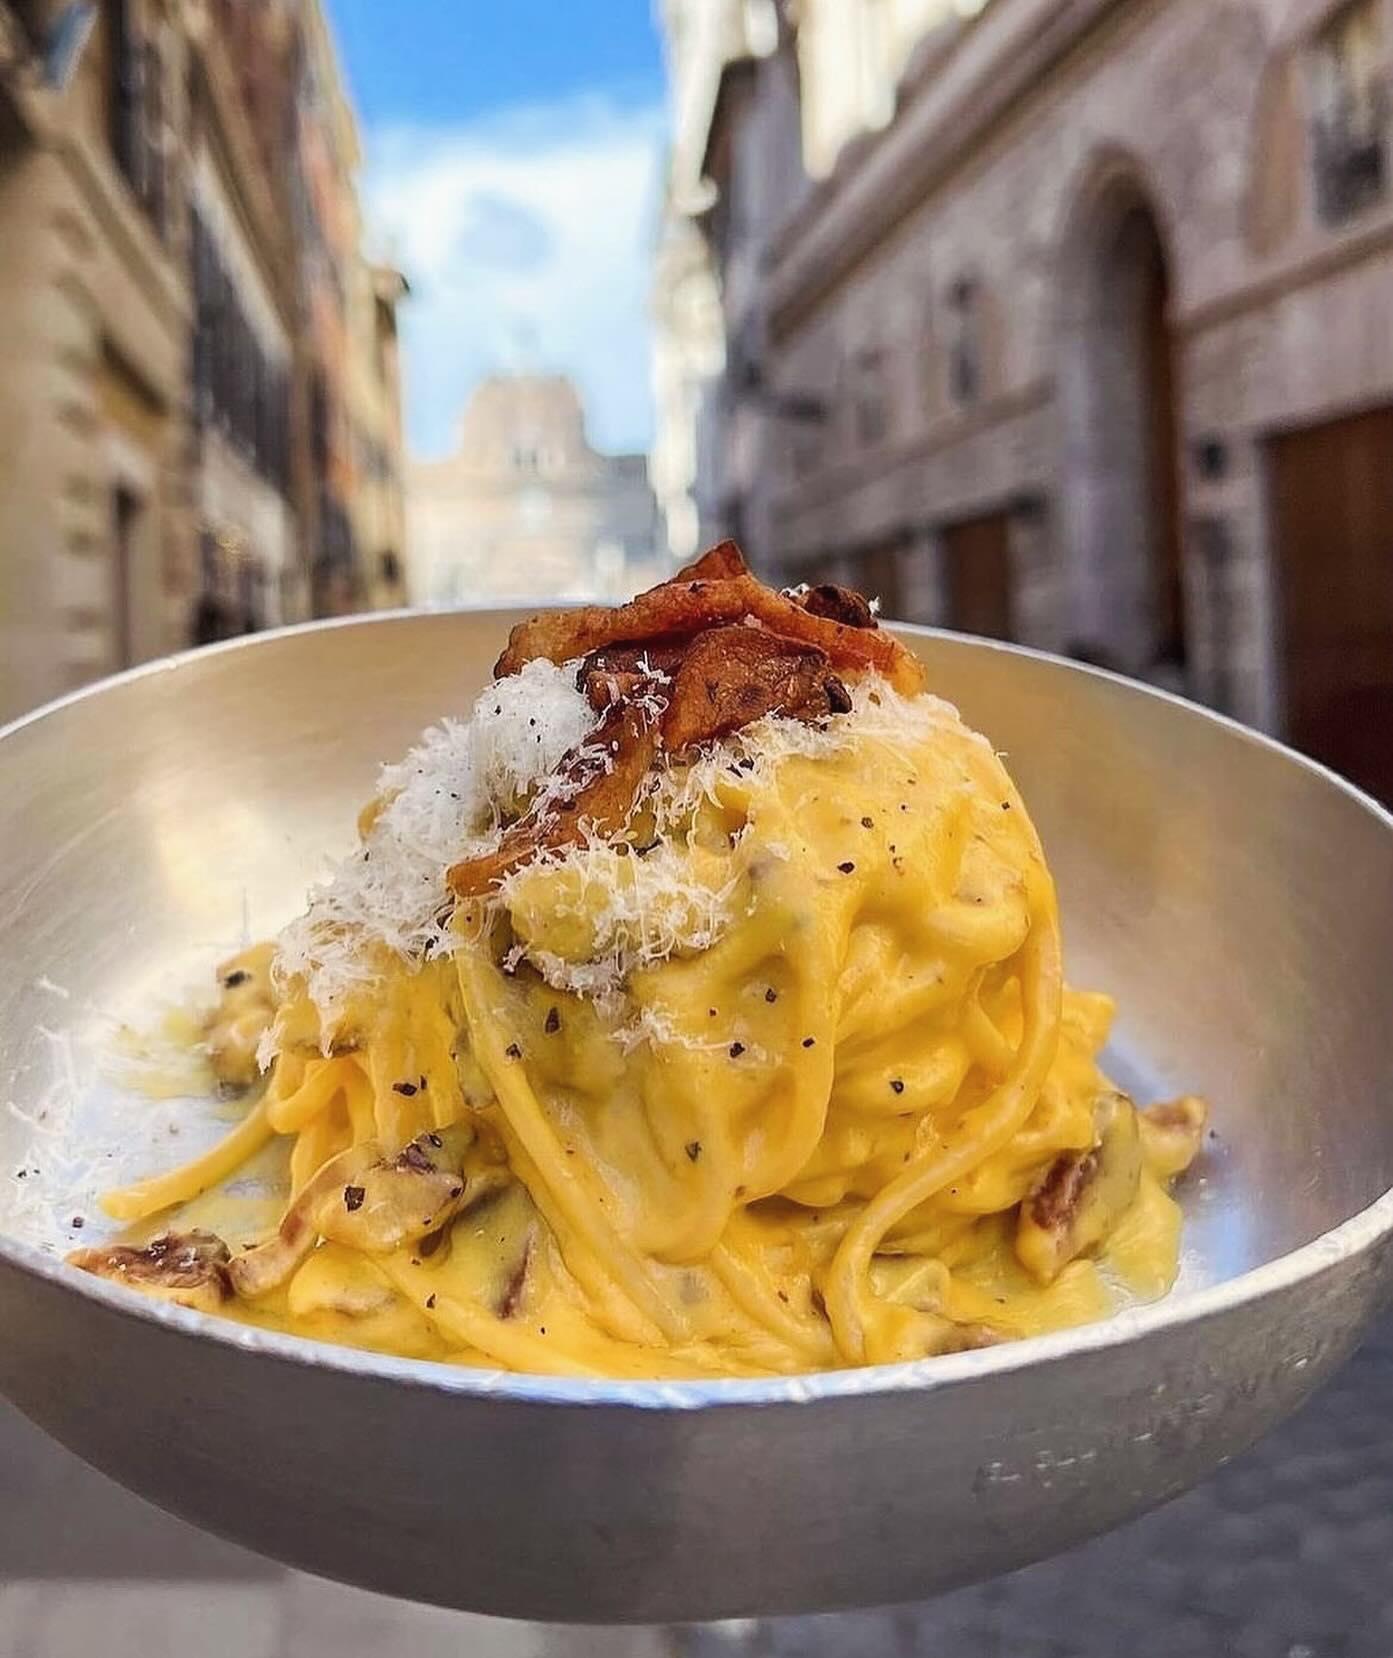 It’s Carbonara Day! 🤤 One of my favorite Roman pasta dishes evaaa. You can guarantee that I’ll be making some today to celebrate 🎉 🕺🏽

“Fidasse è bene, na carbonara è mejo!”

“Trust is good, carbonara is better!”

#carbonaraday #carbonararomana #pasta #ny #semprelaziomerda 💛❤️